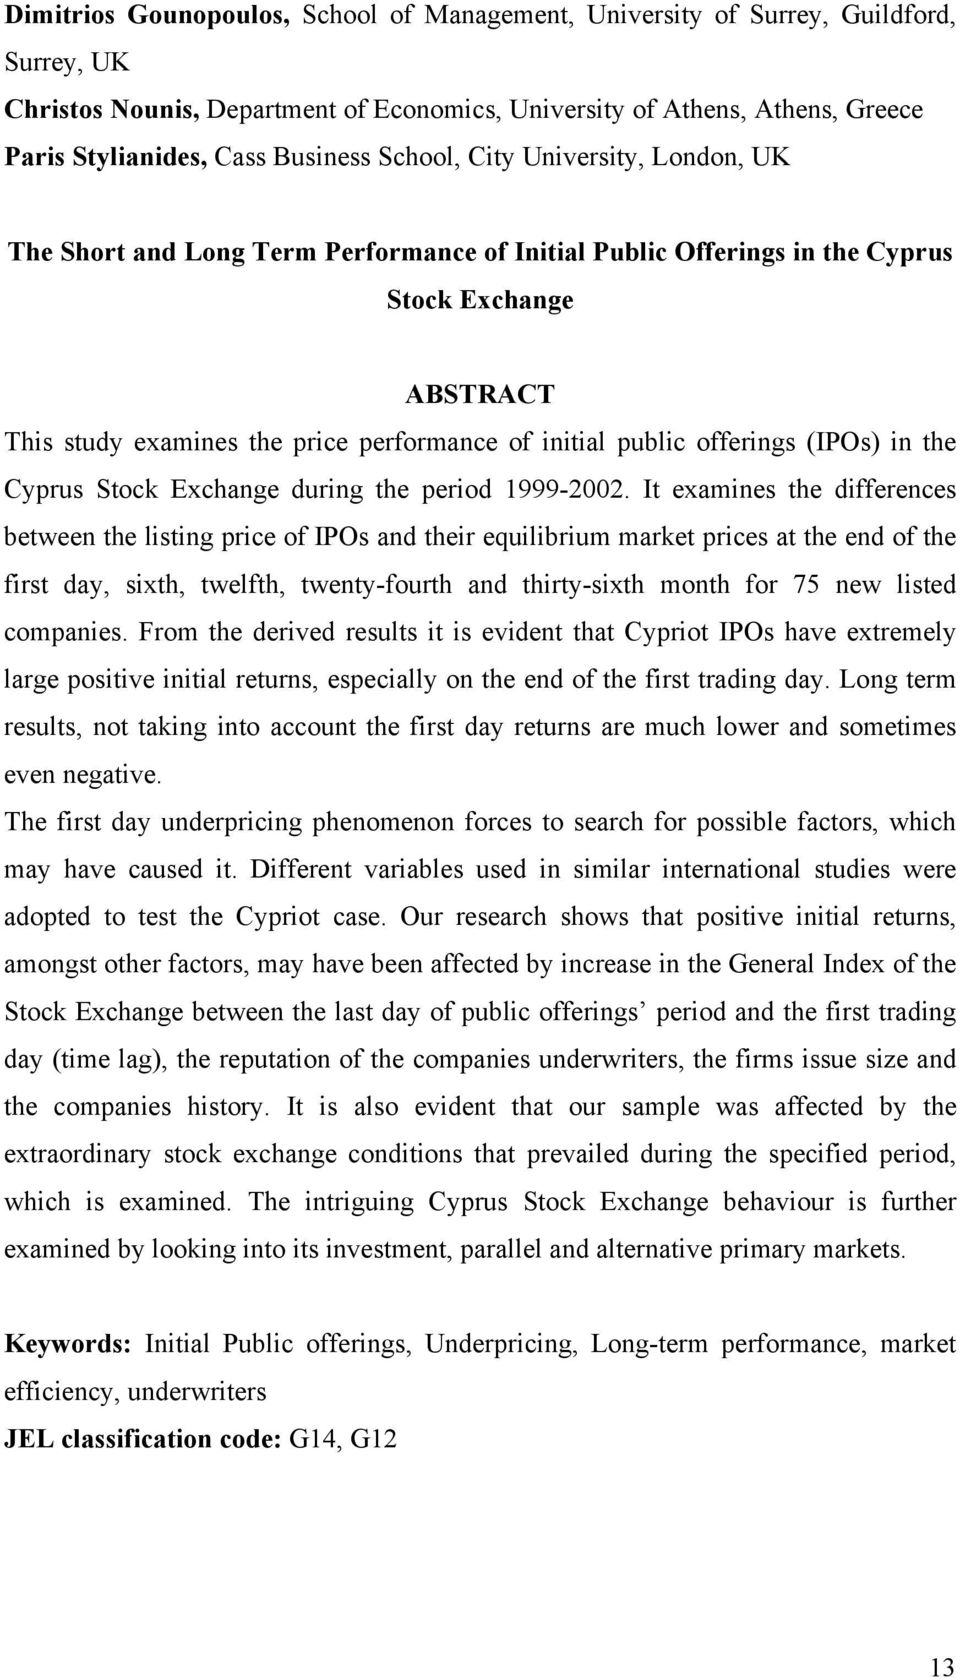 offerings (IPOs) in the Cyprus Stock Exchange during the period 1999-2002.